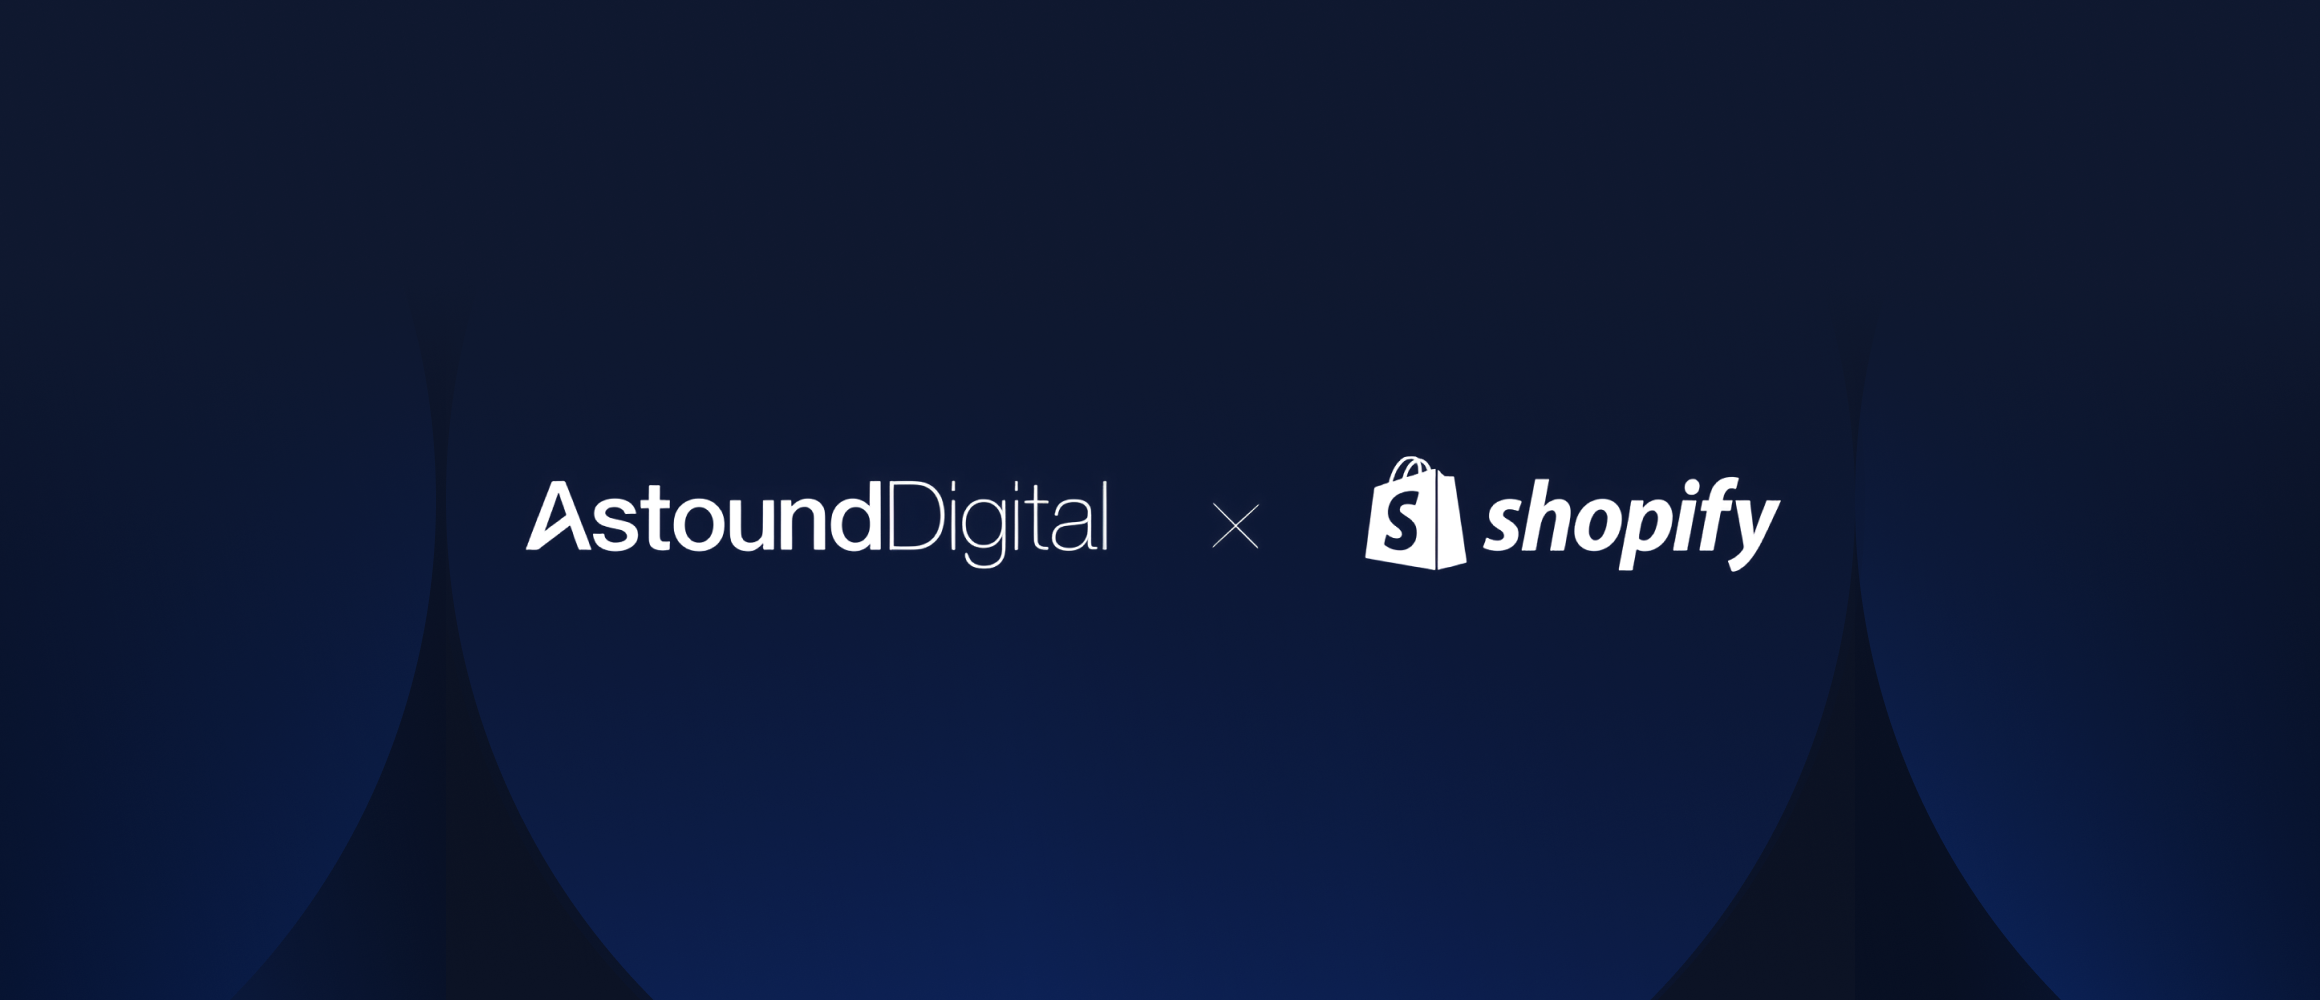 A dark blue background featuring the logos of Astound Digital and Shopify.